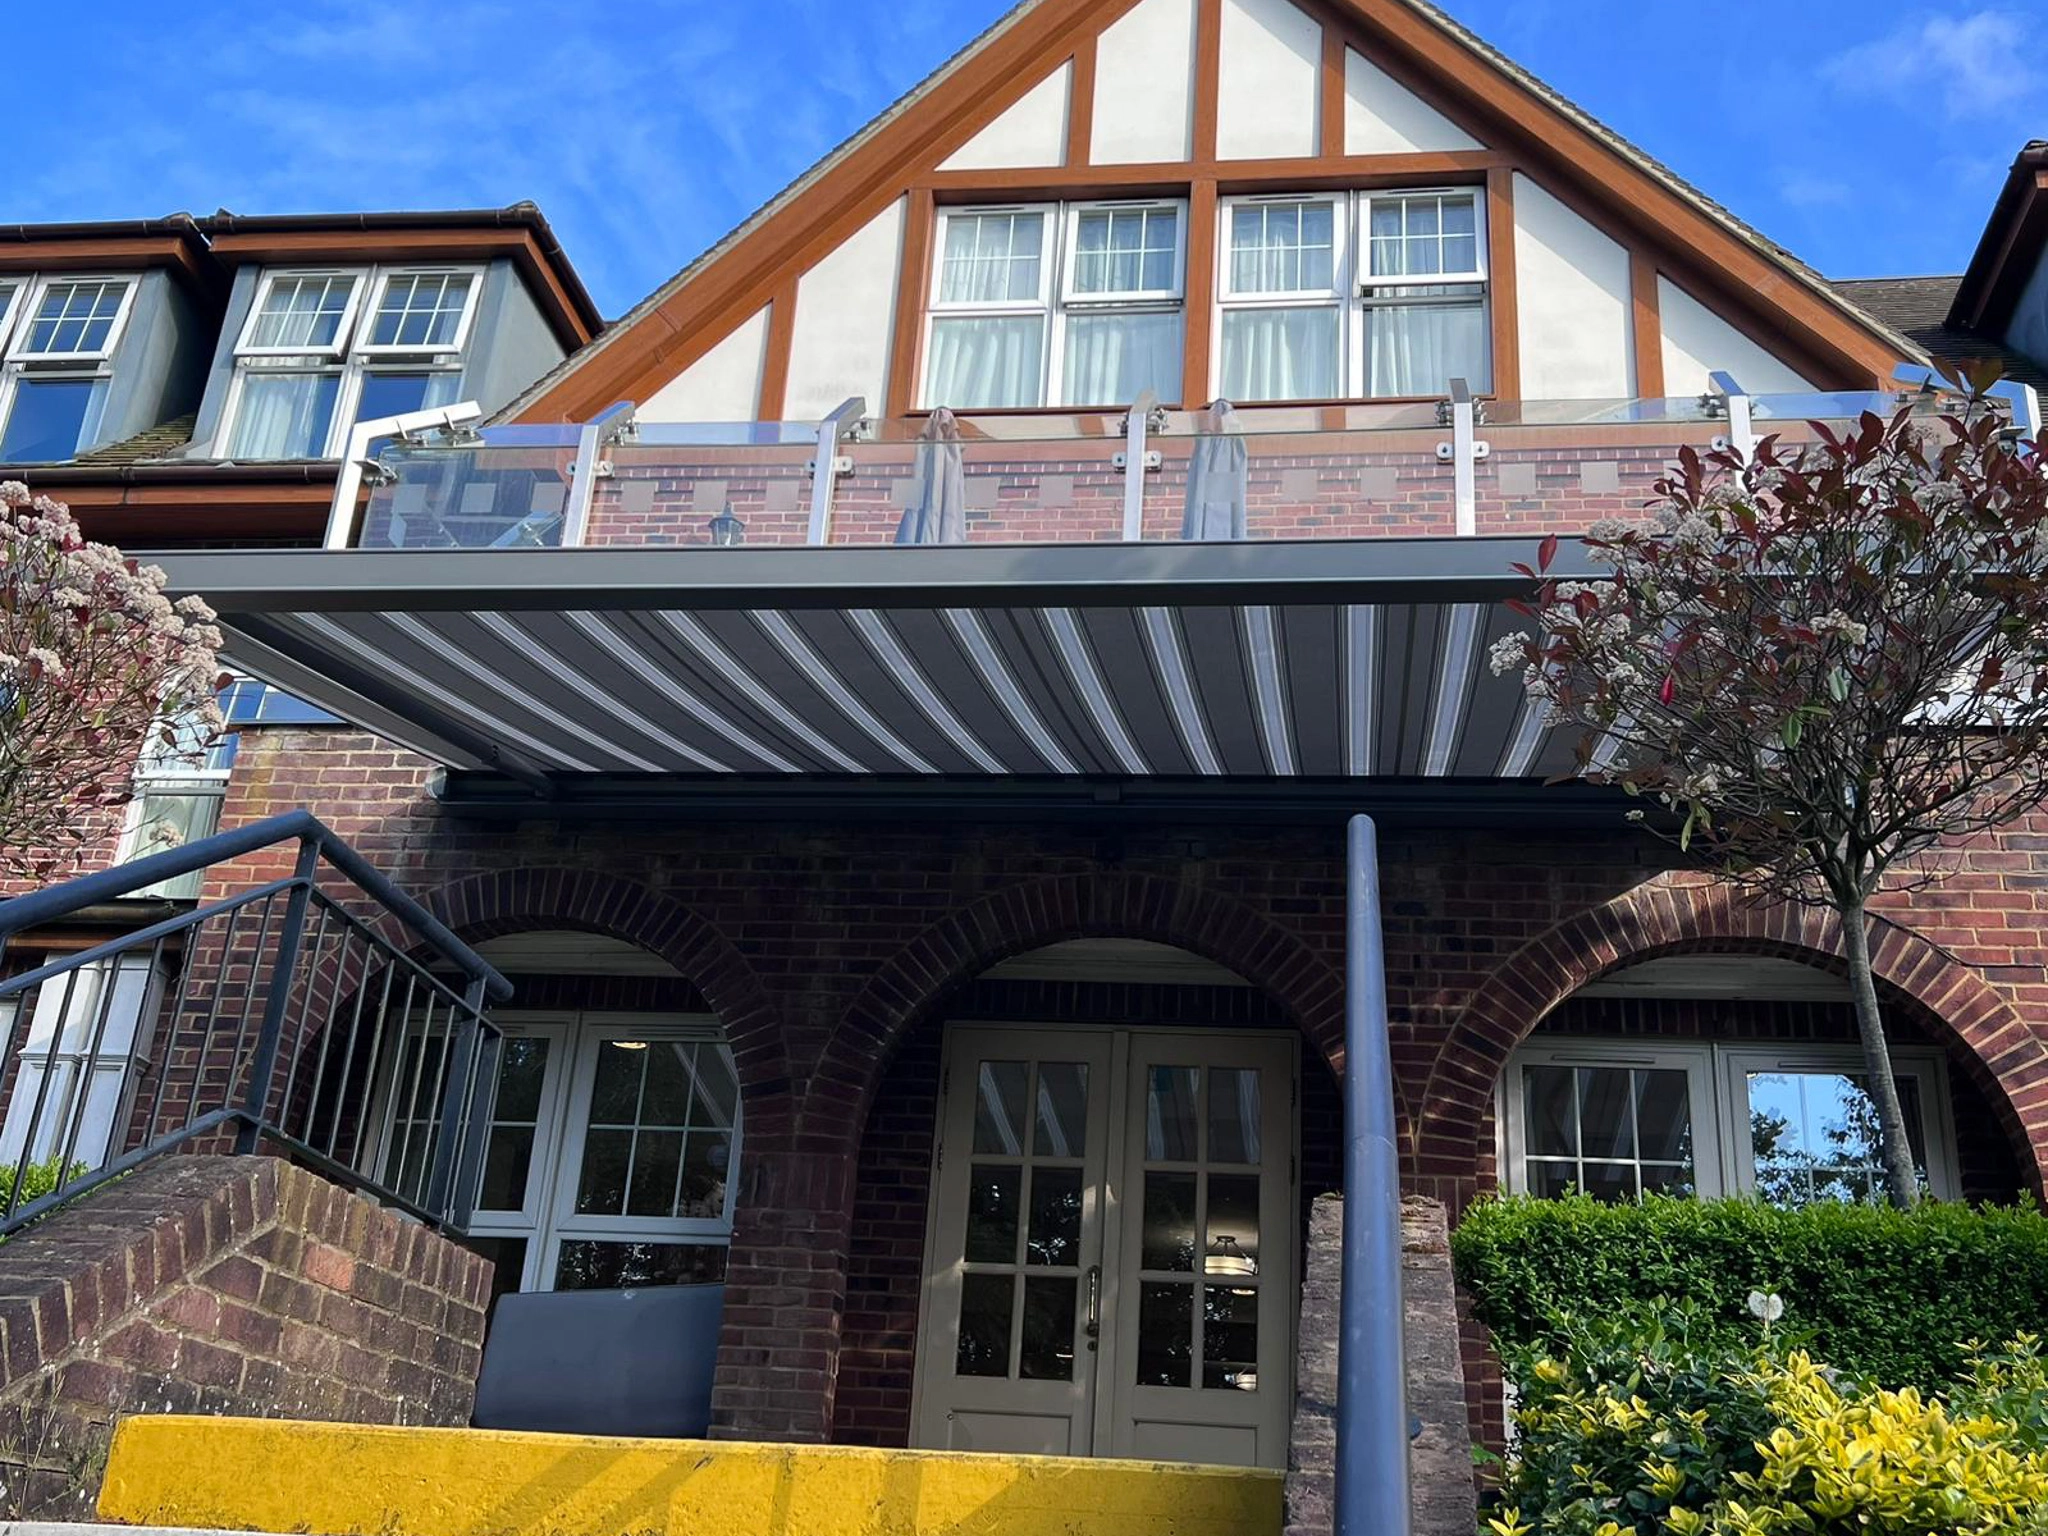 MX-1 6-meter awning fully extended at Banstead Care Home